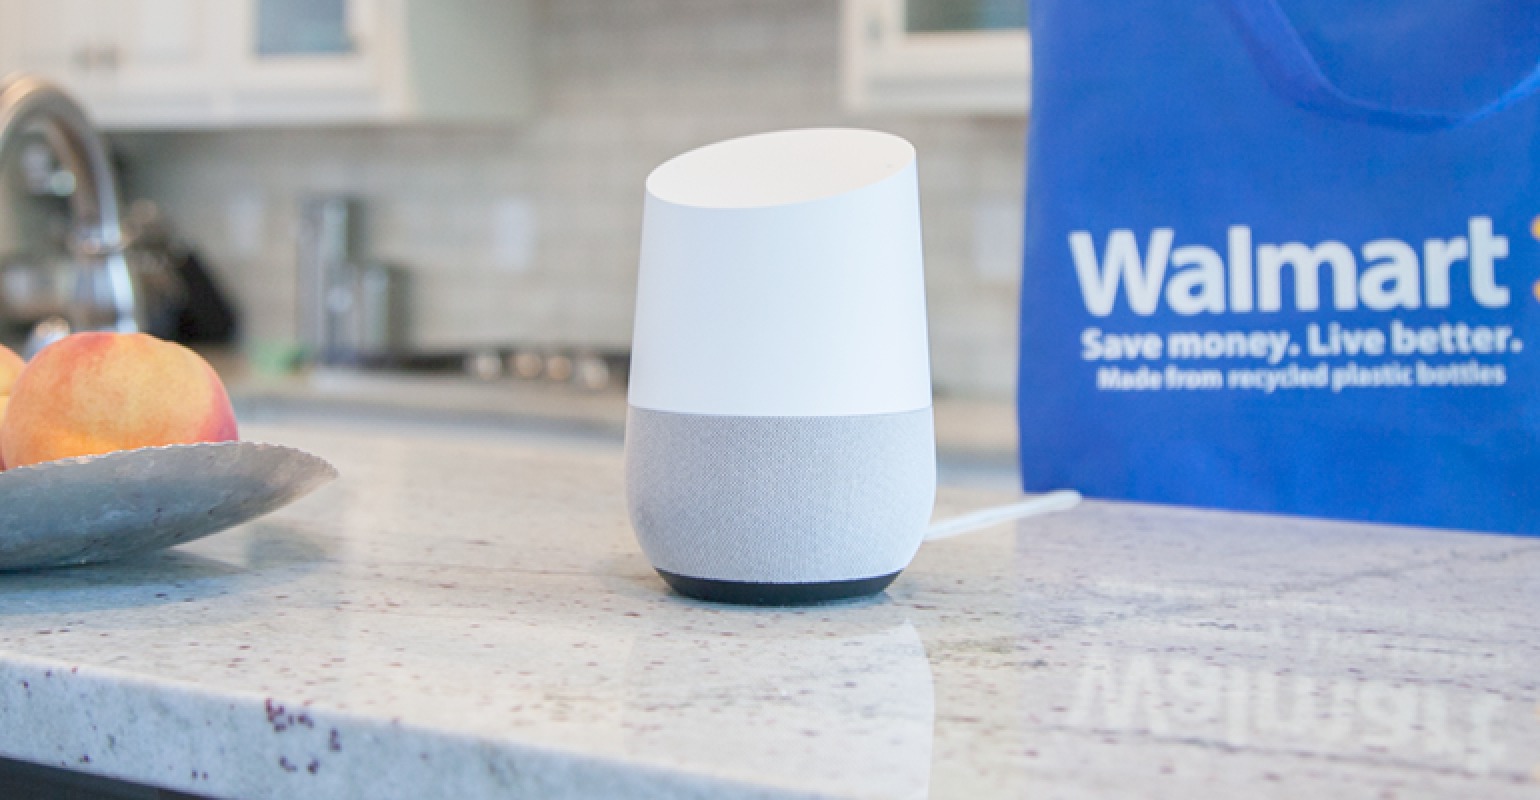 How To Link Google Home To Walmart